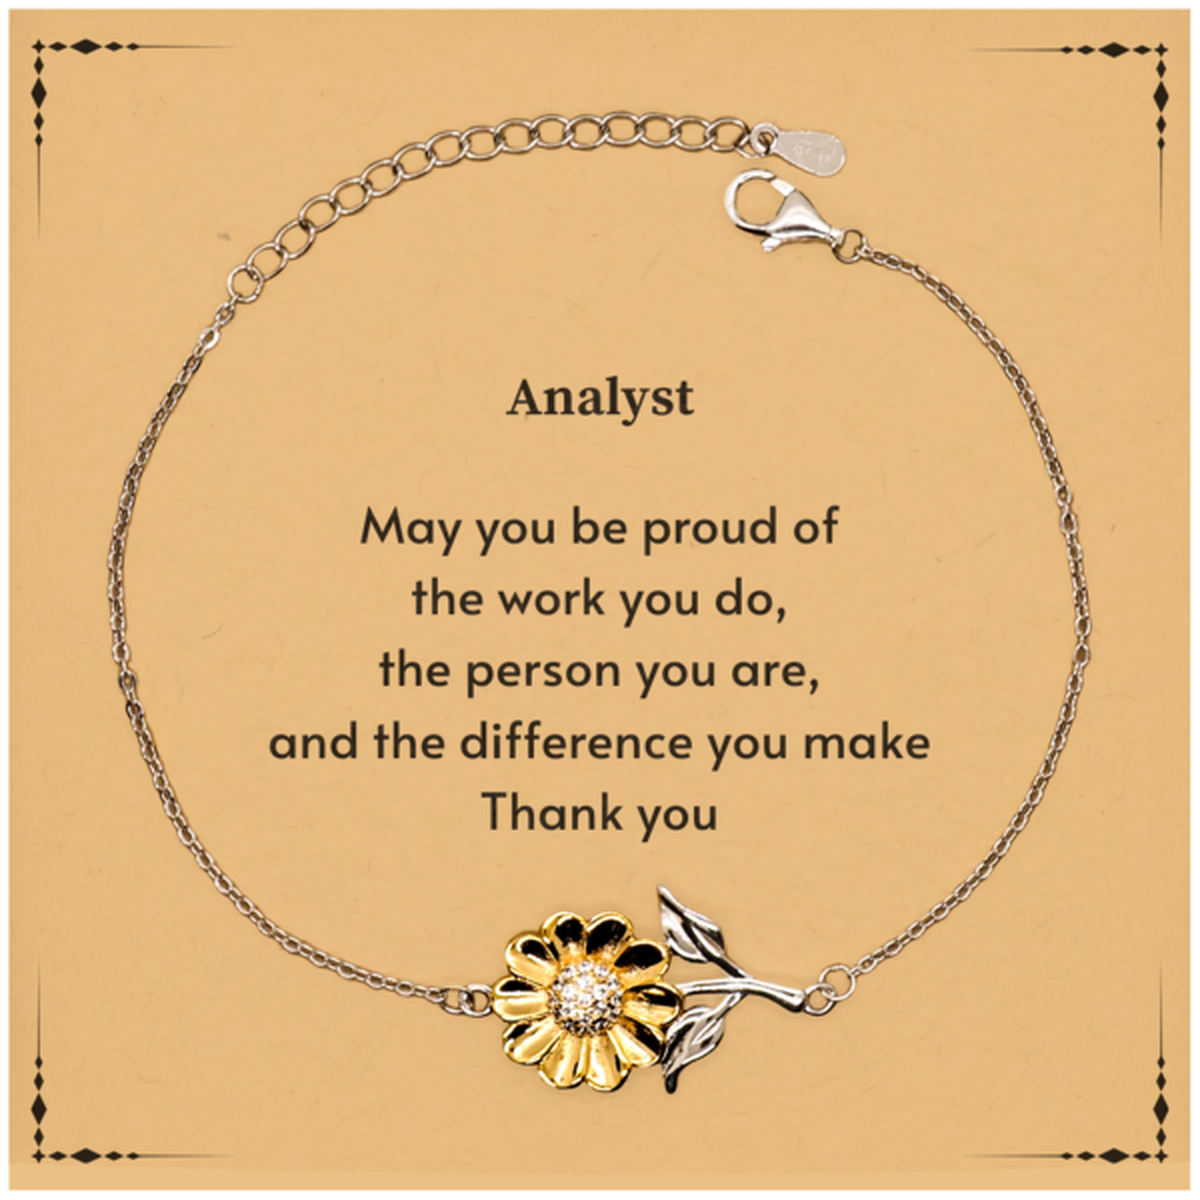 Heartwarming Sunflower Bracelet Retirement Coworkers Gifts for Analyst, Analyst May You be proud of the work you do, the person you are Gifts for Boss Men Women Friends